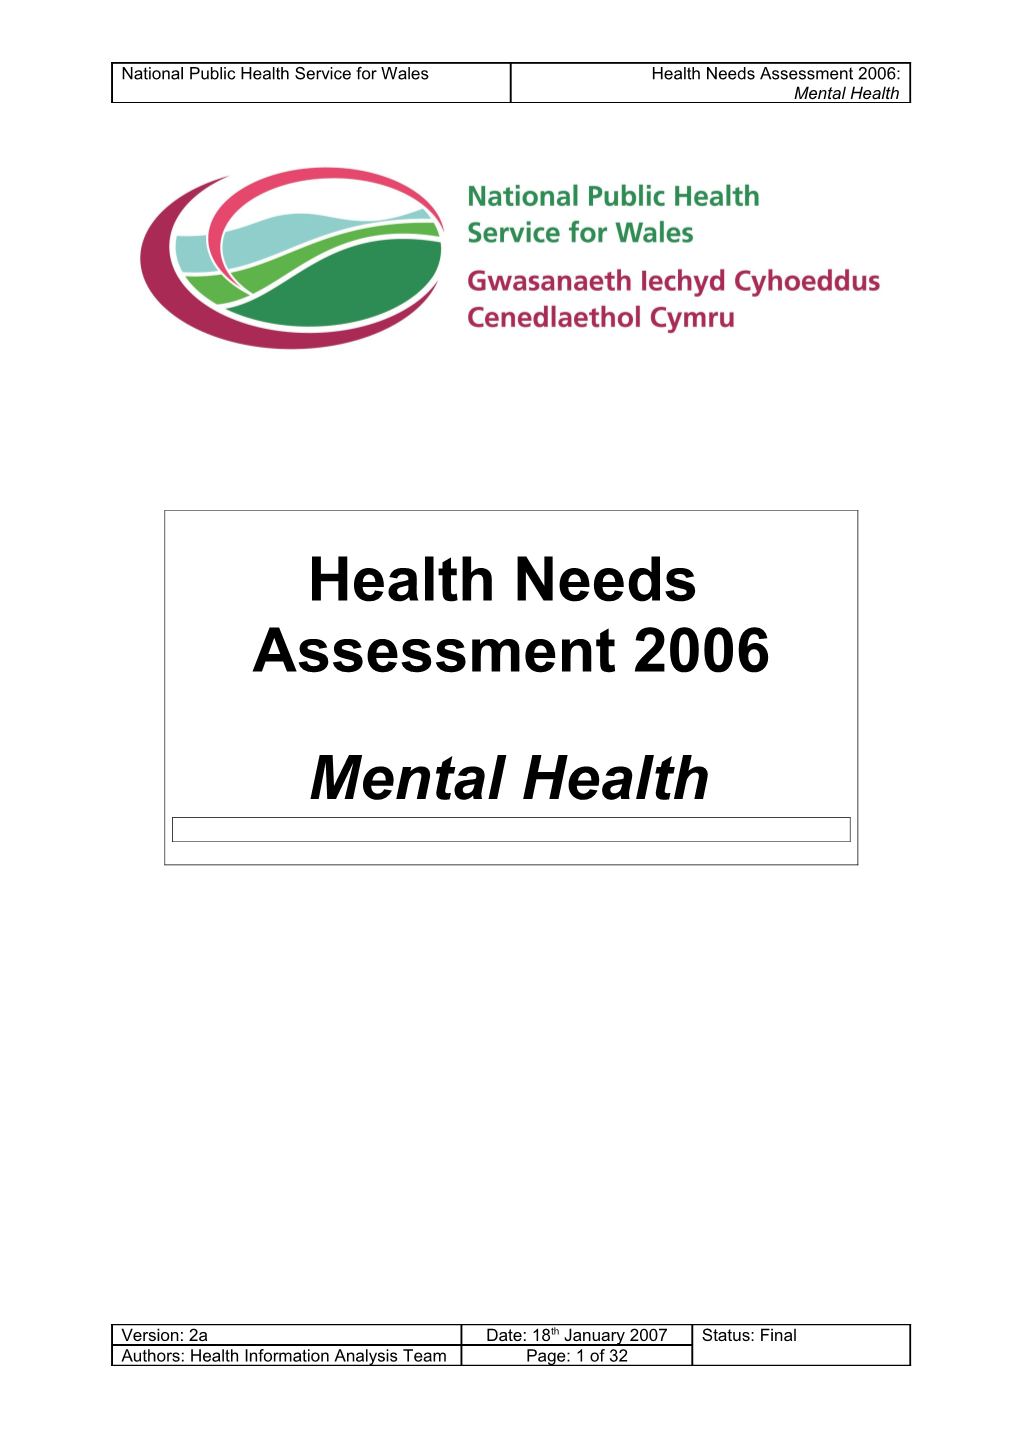 Copyright 2007 National Public Health Service for Wales